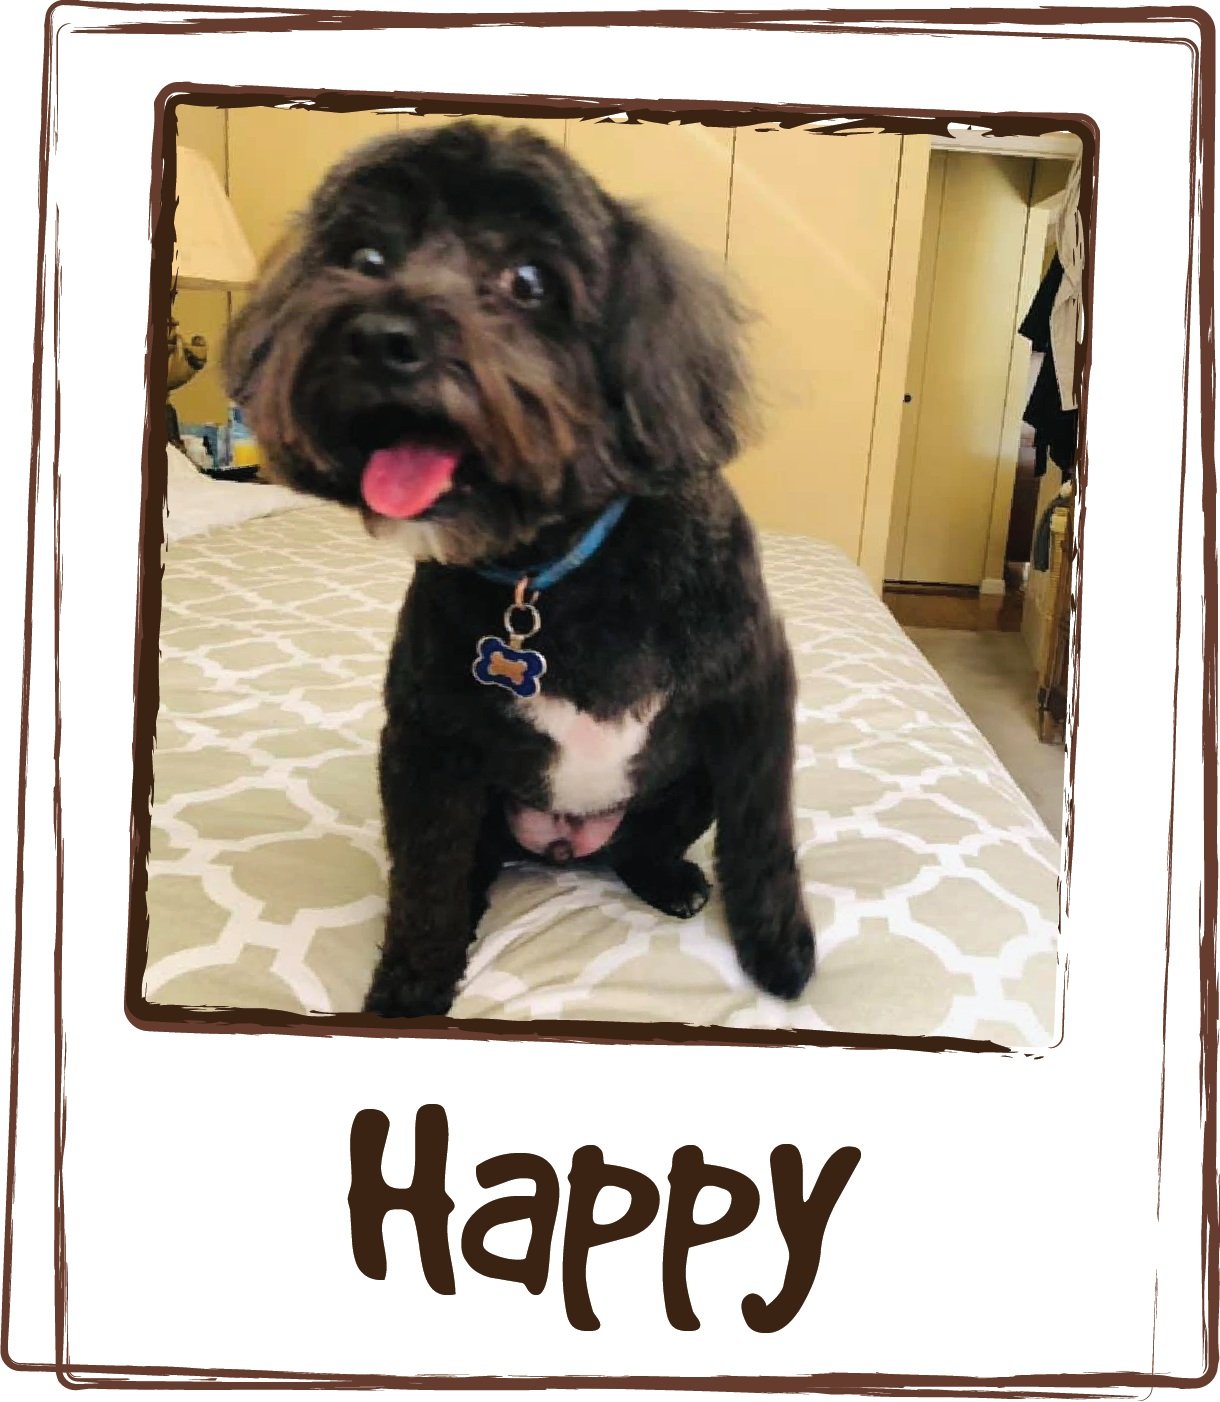  “I have been using Lick's Multi-Vitamin since we got our dog Happy 7 years ago. I am happy with my experience for I can say that in those 7 years, Happy has had Perfect Health.. never a reason to take him to Vet, except for a checkup visit. THANK YO